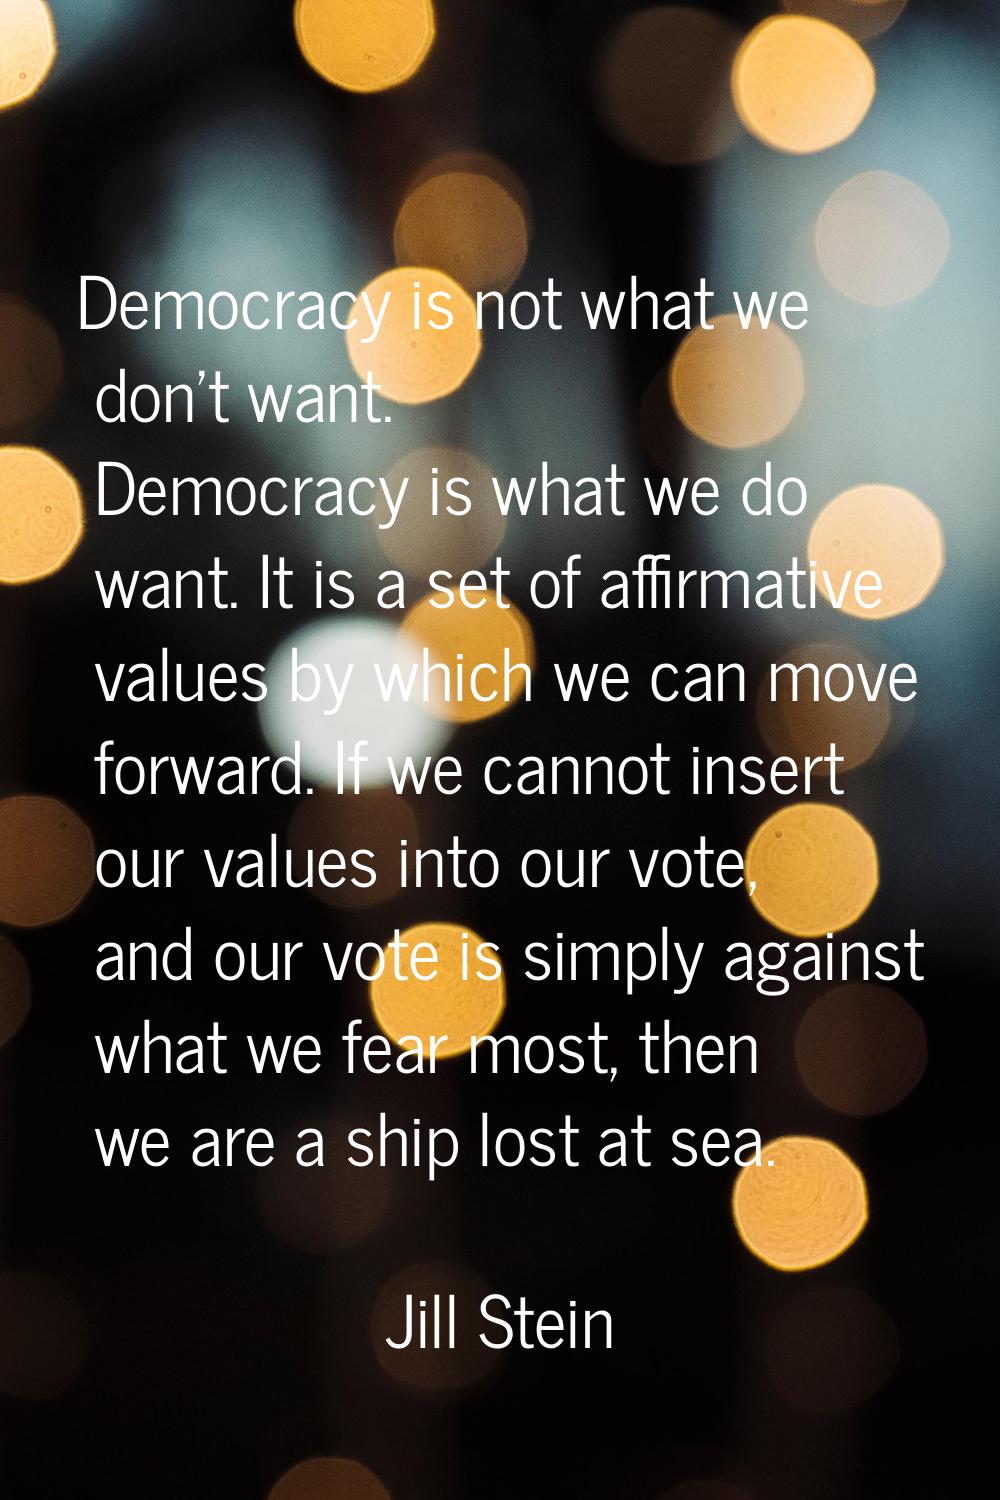 Democracy is not what we don't want. Democracy is what we do want. It is a set of affirmative value